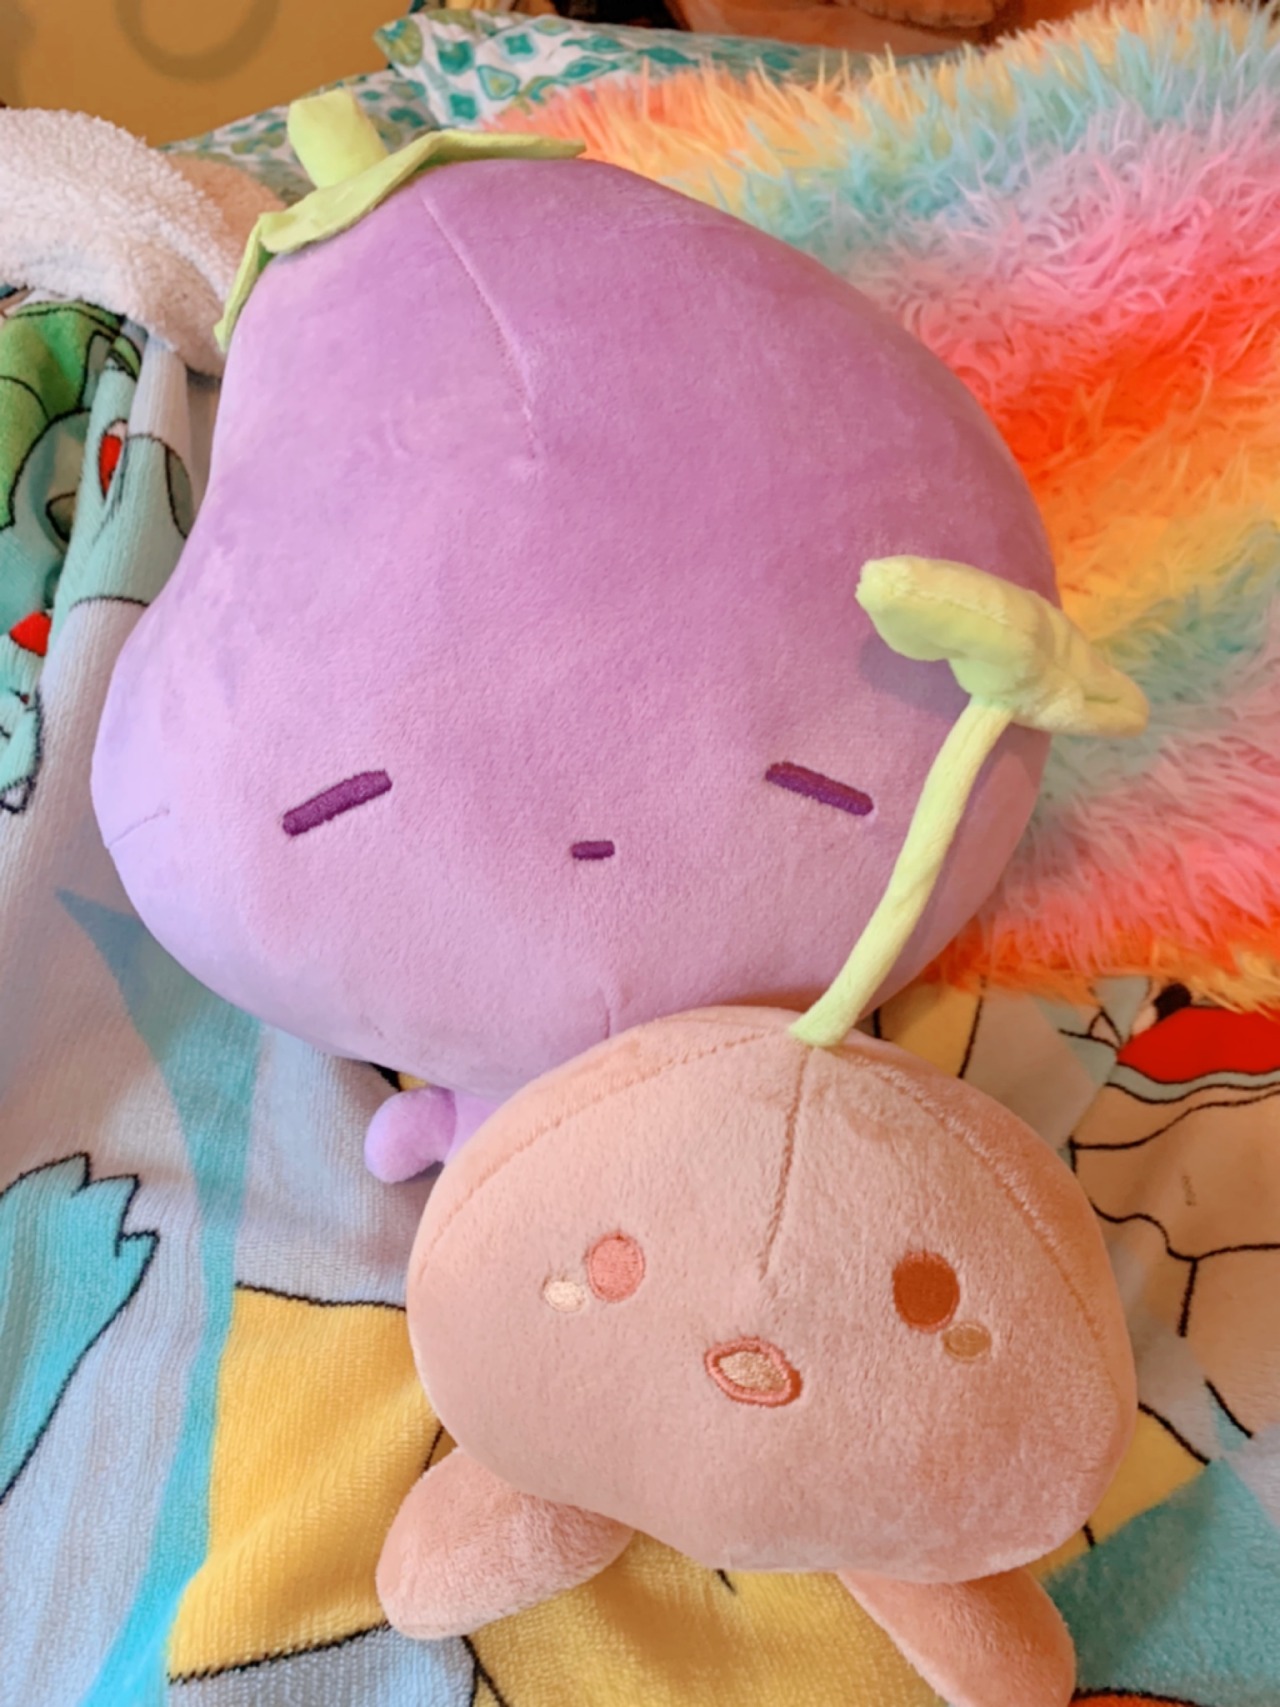 OMOCAT · OMORI plushies are now available!